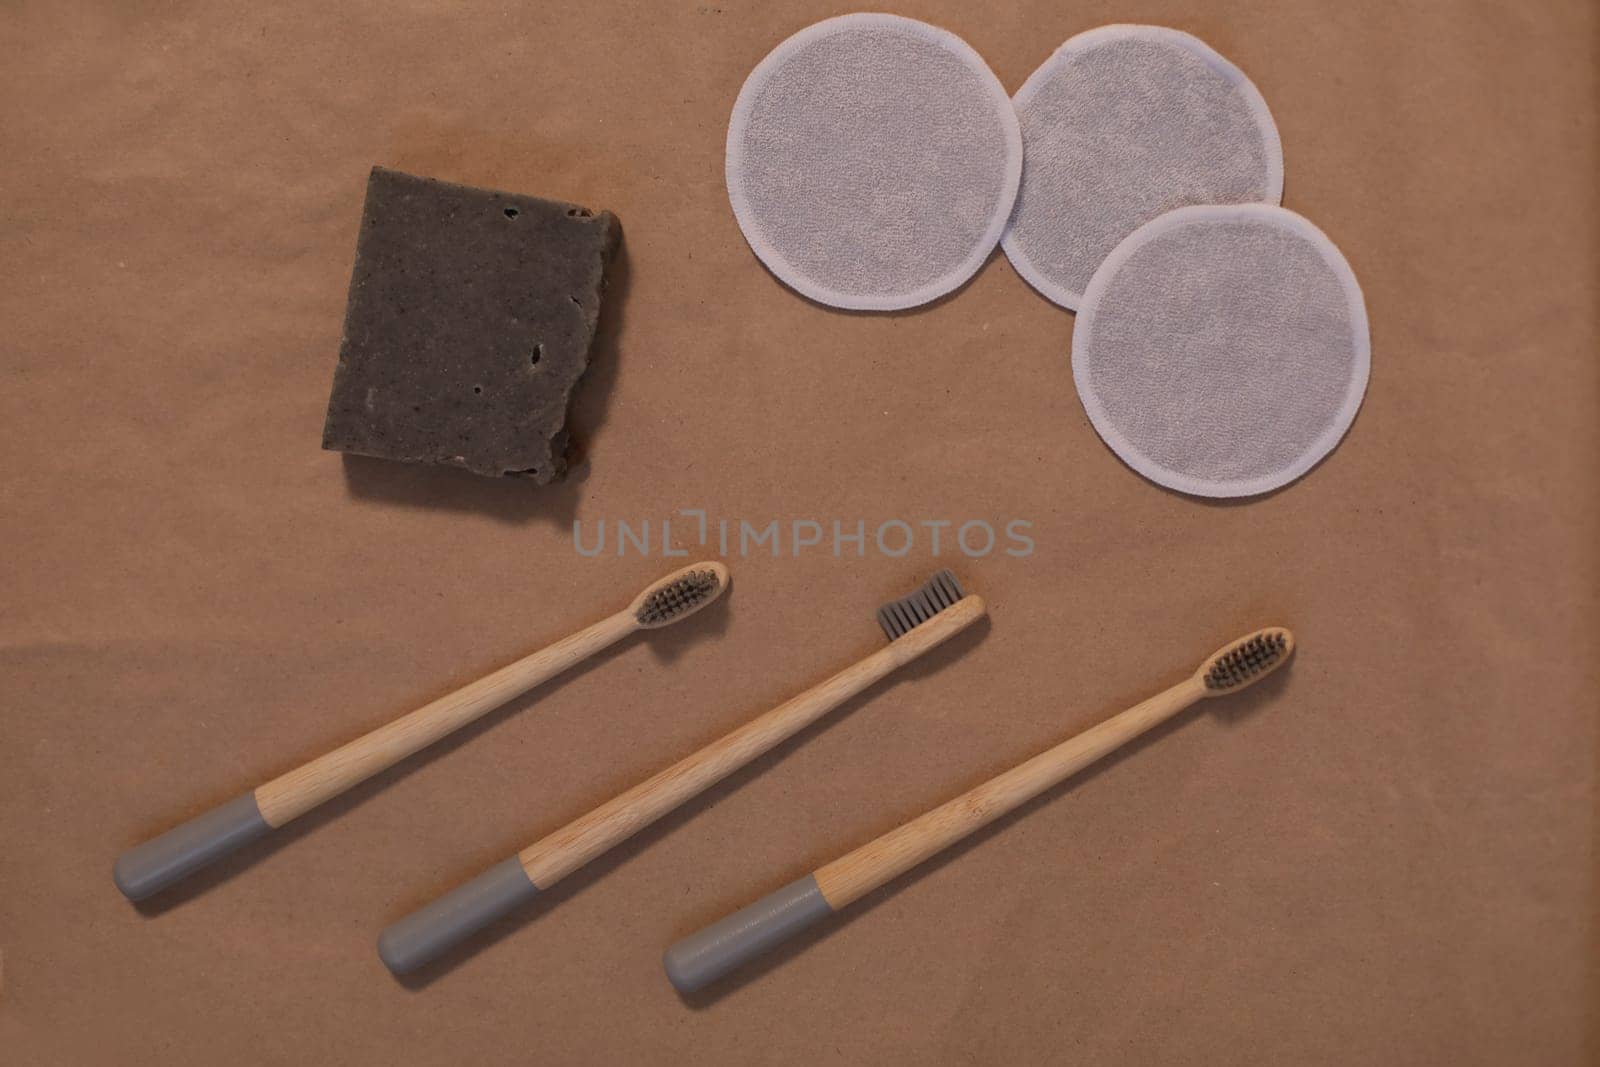 plastic free and eco friendly products in household, wooden toothbrushes, cotton swabs on craft paper background top view by paralisart